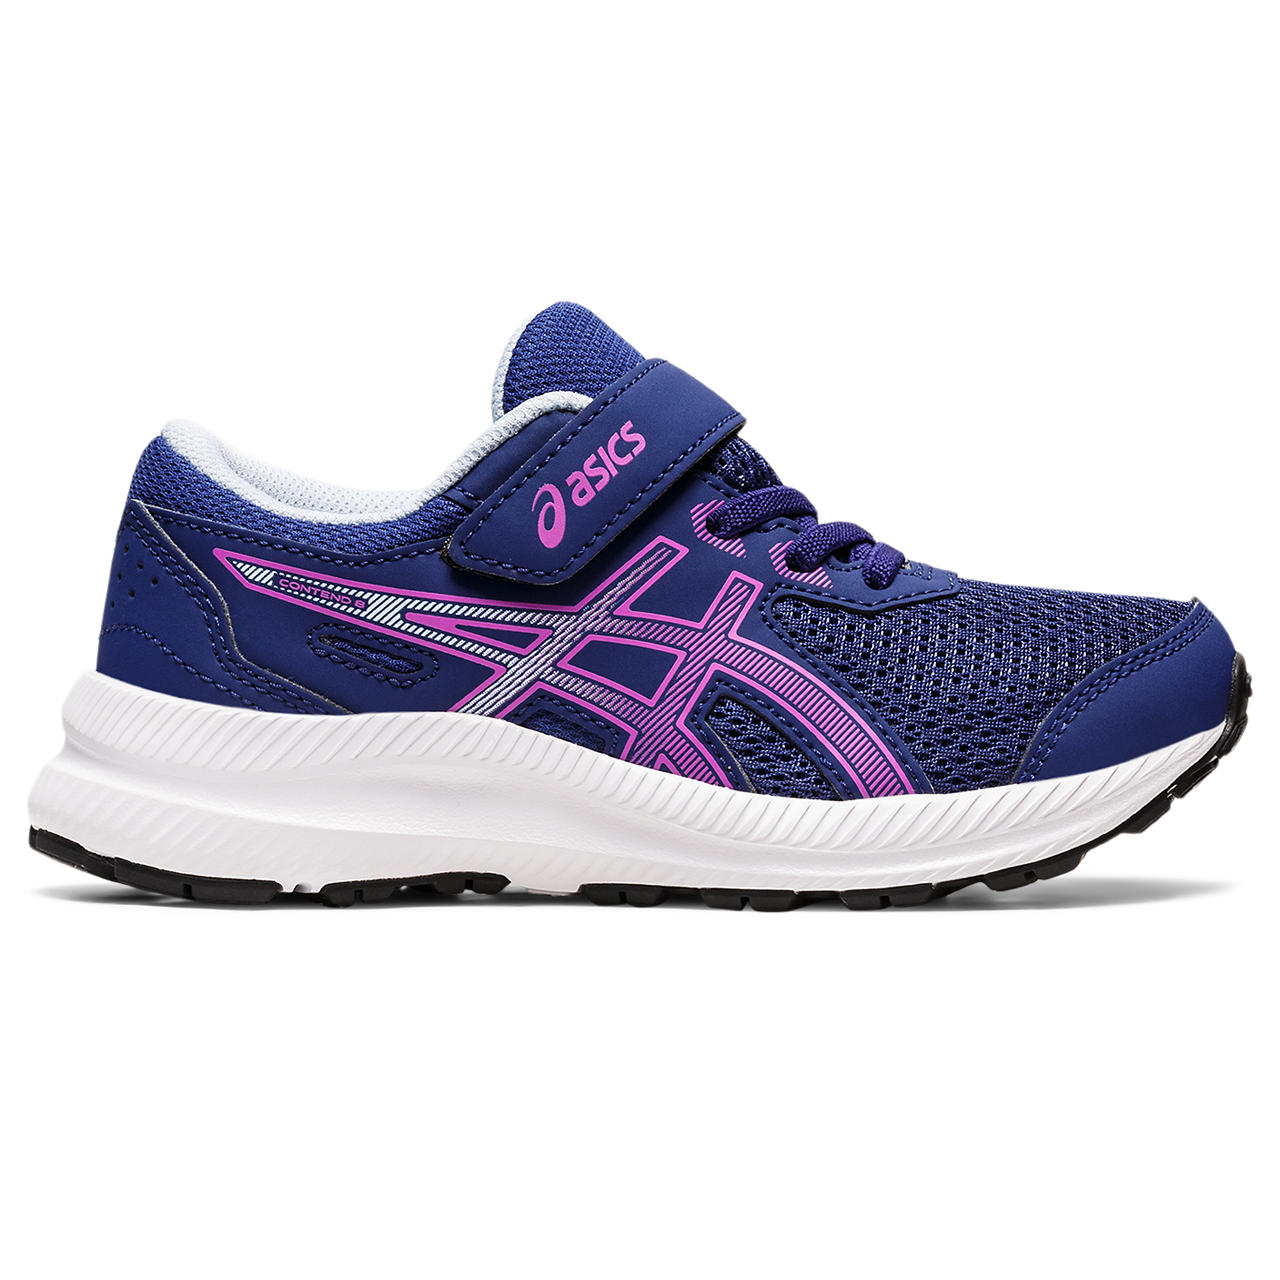 ASICS CONTEND 8 PS, ILLUSION BLUE/PURE SILVER, swatch